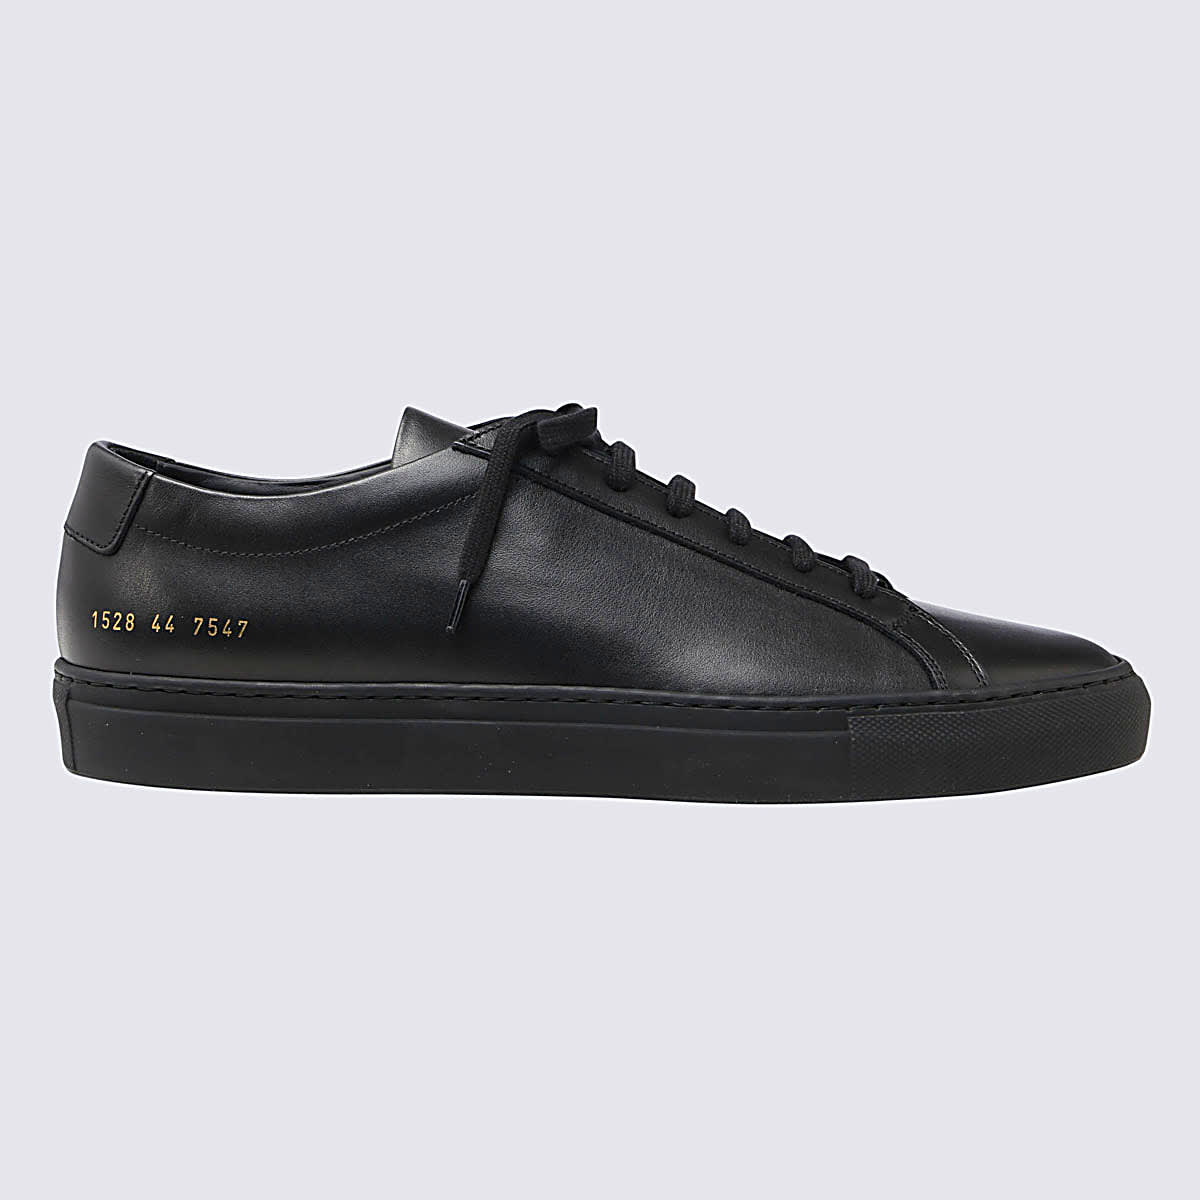 Common Projects Black Leather Original Achilles Sneakers